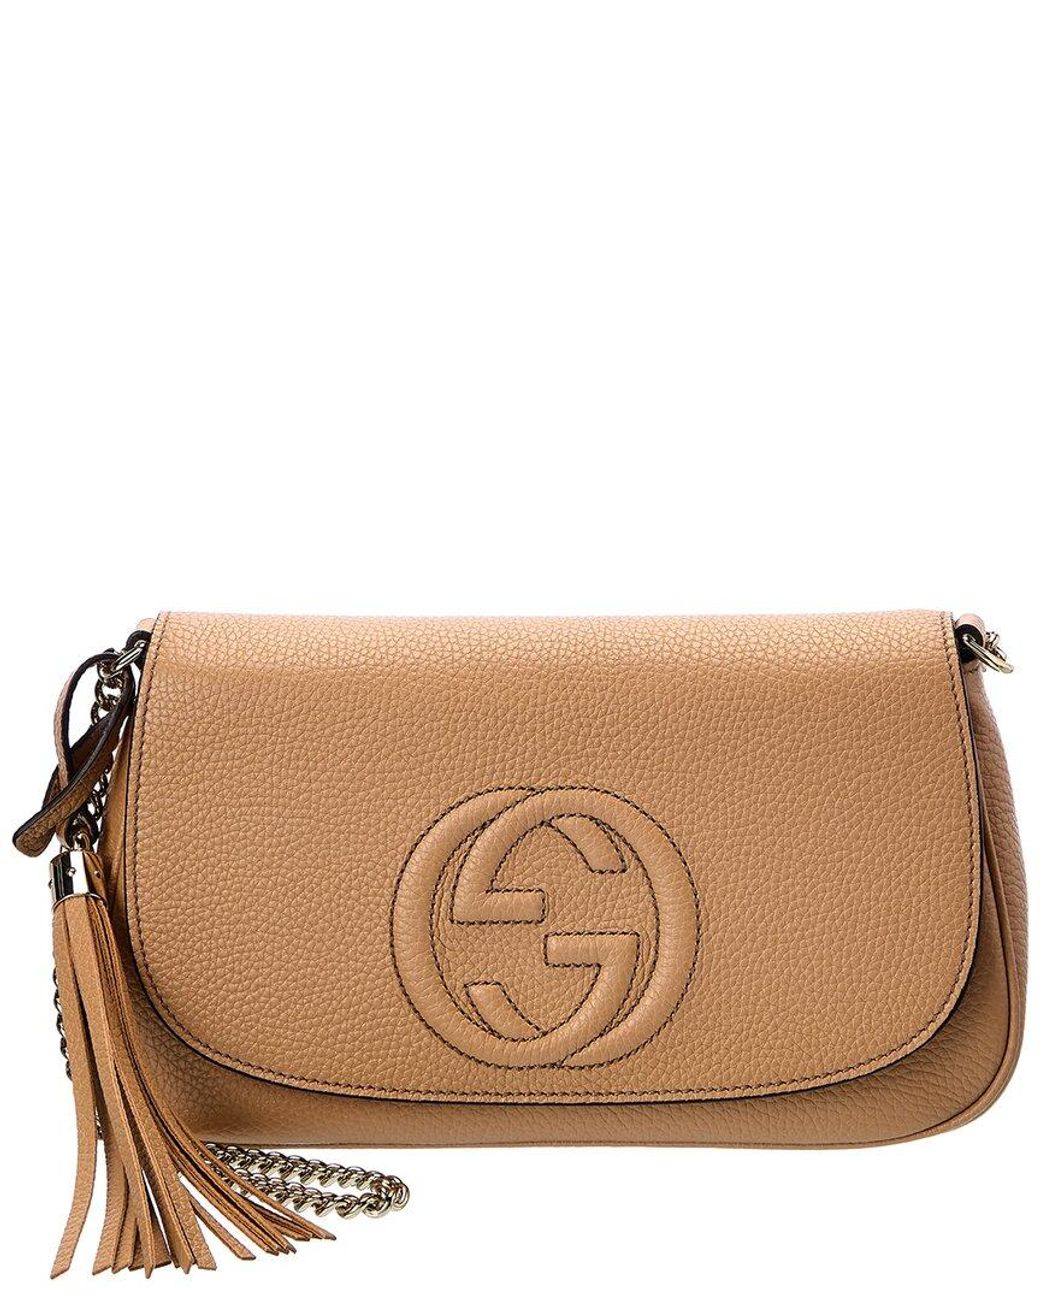 Gucci Soho Disco Leather Crossbody in Brown | Lyst